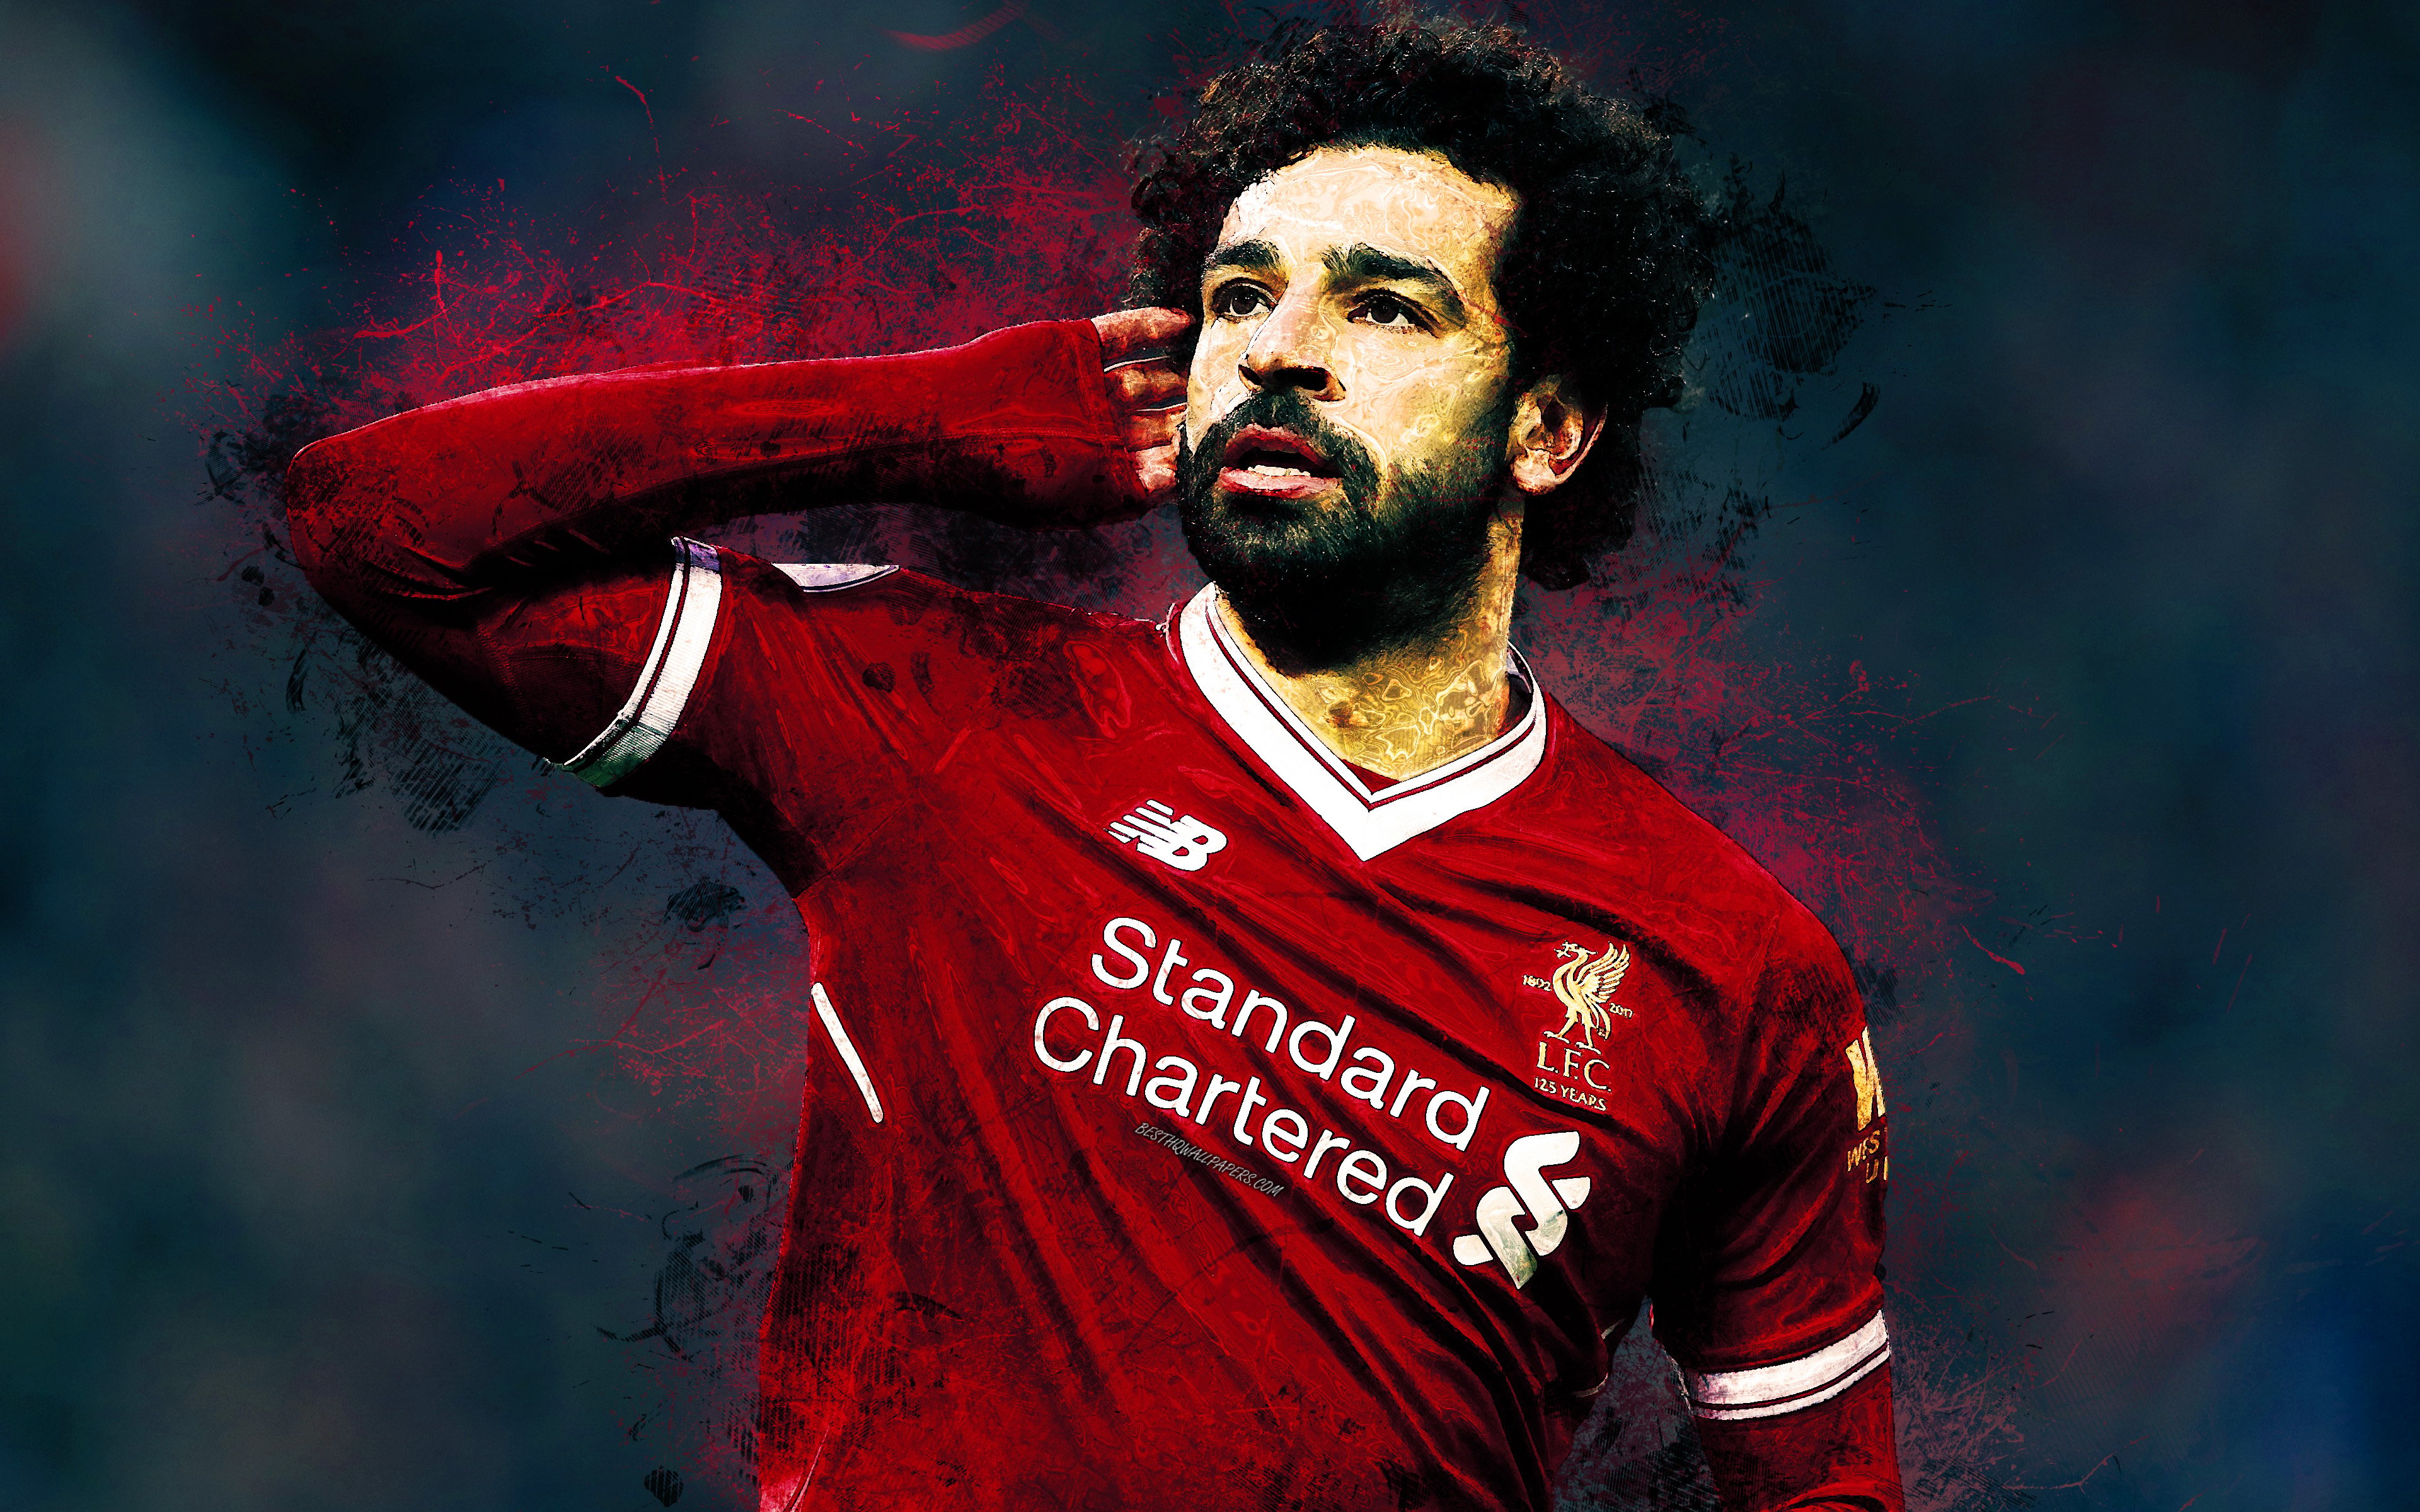 Download wallpaper Mohamed Salah, 4k, creative grunge art, portrait, Liverpool FC, football, bright lines, splashes, paint art, Egyptian football player, Premier League, England for desktop with resolution 3840x2400. High Quality HD picture